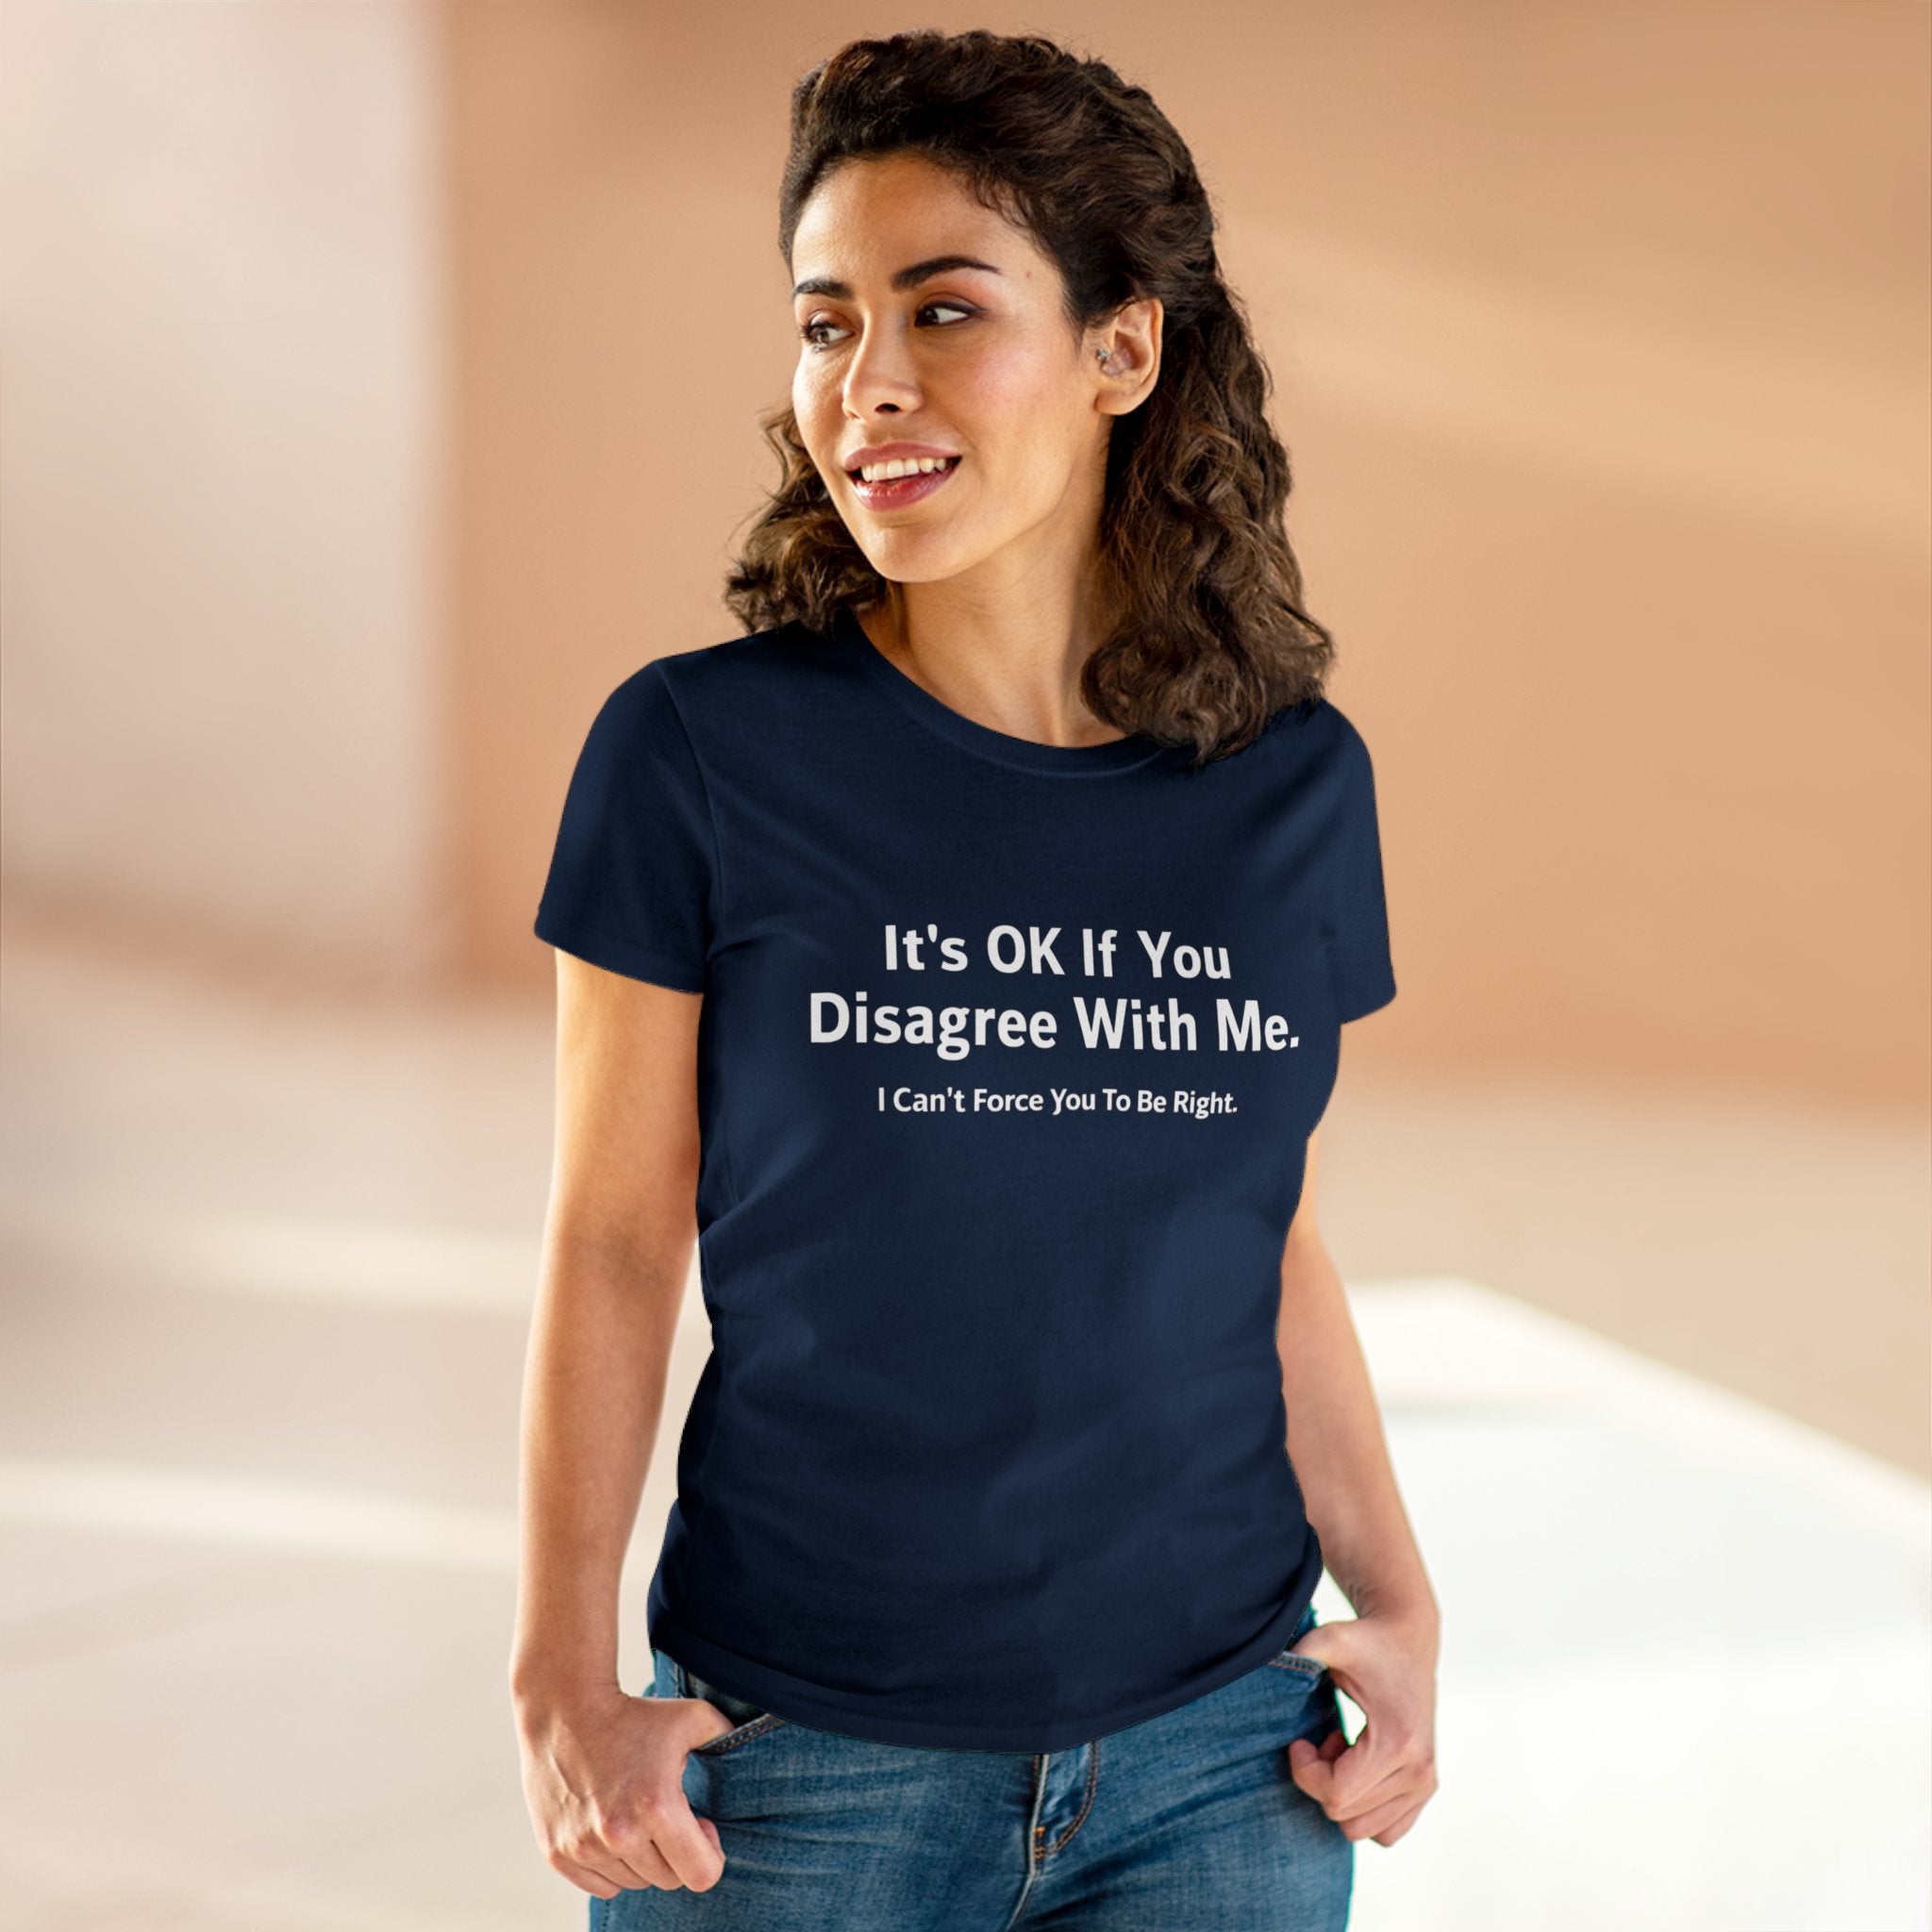 A woman wearing a navy blue "It's Ok If You Disagree With Me - Women's Tee" stands in a softly lit room. The pre-shrunk fabric ensures her comfort while making a bold statement.